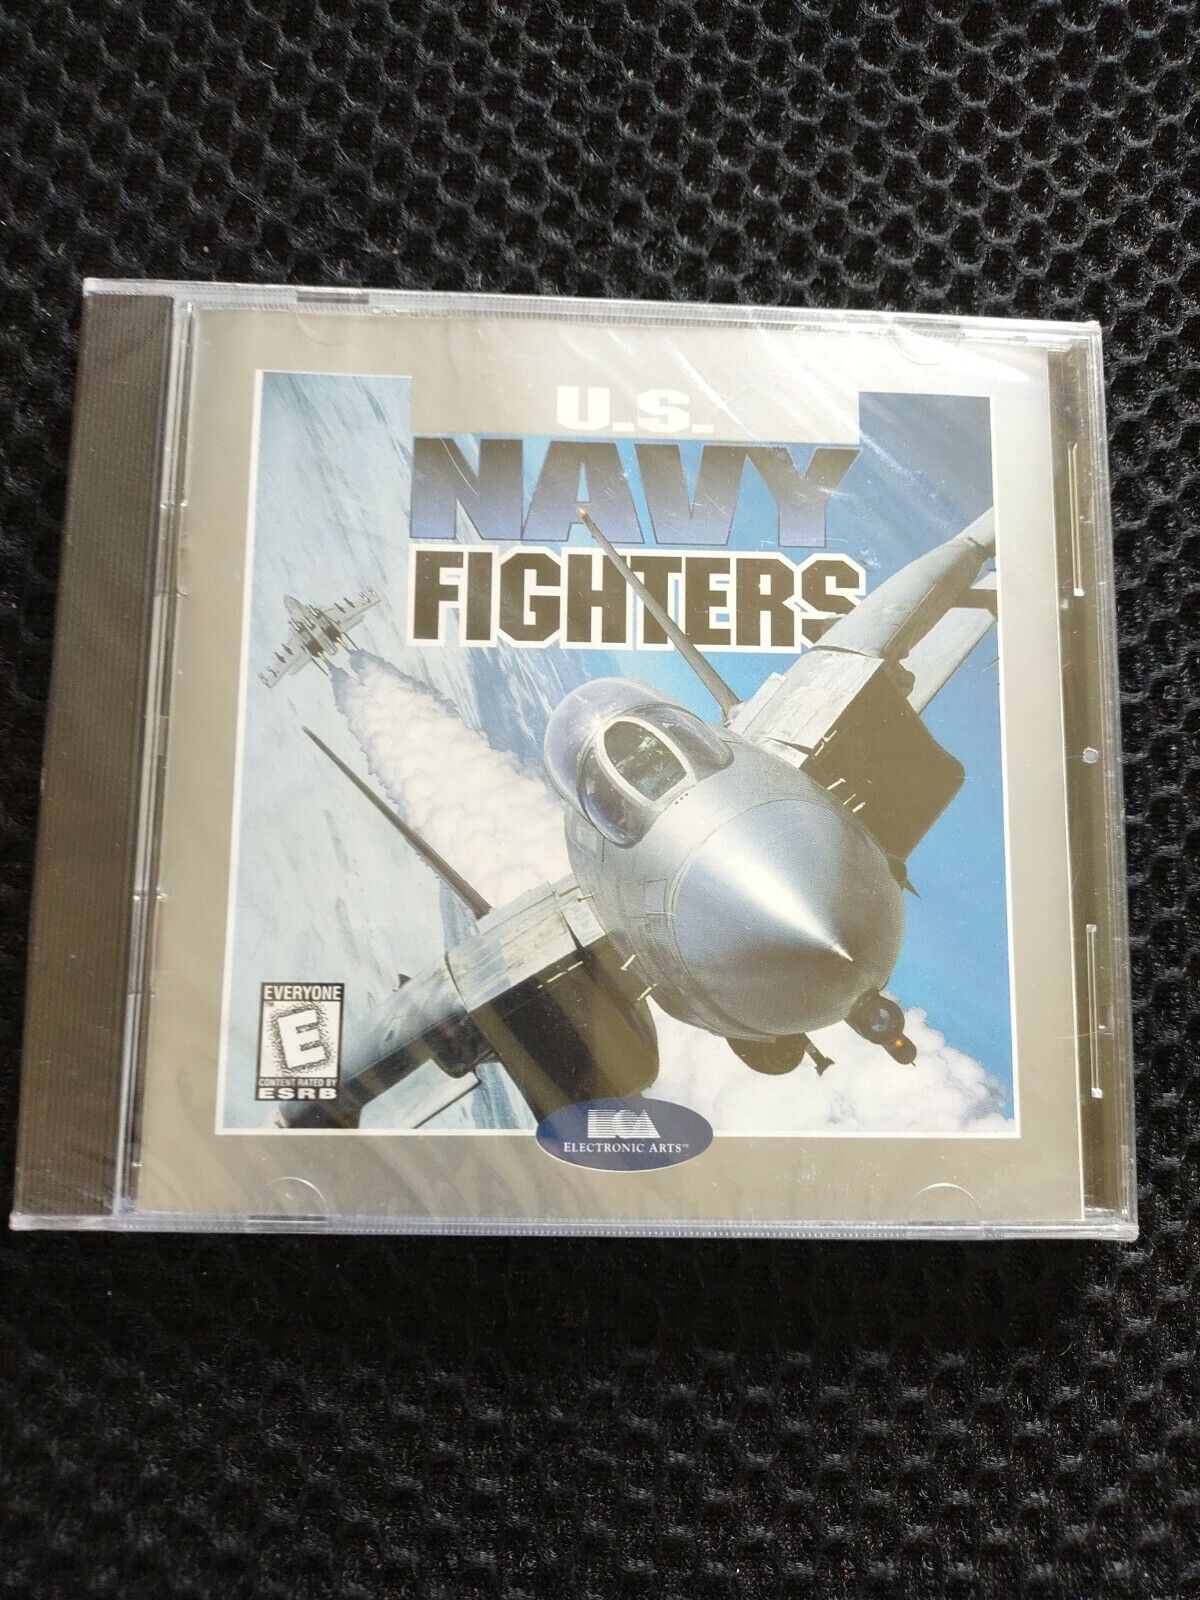 U.S. Navy Fighters (PC 1998) Windows Video Game Sealed